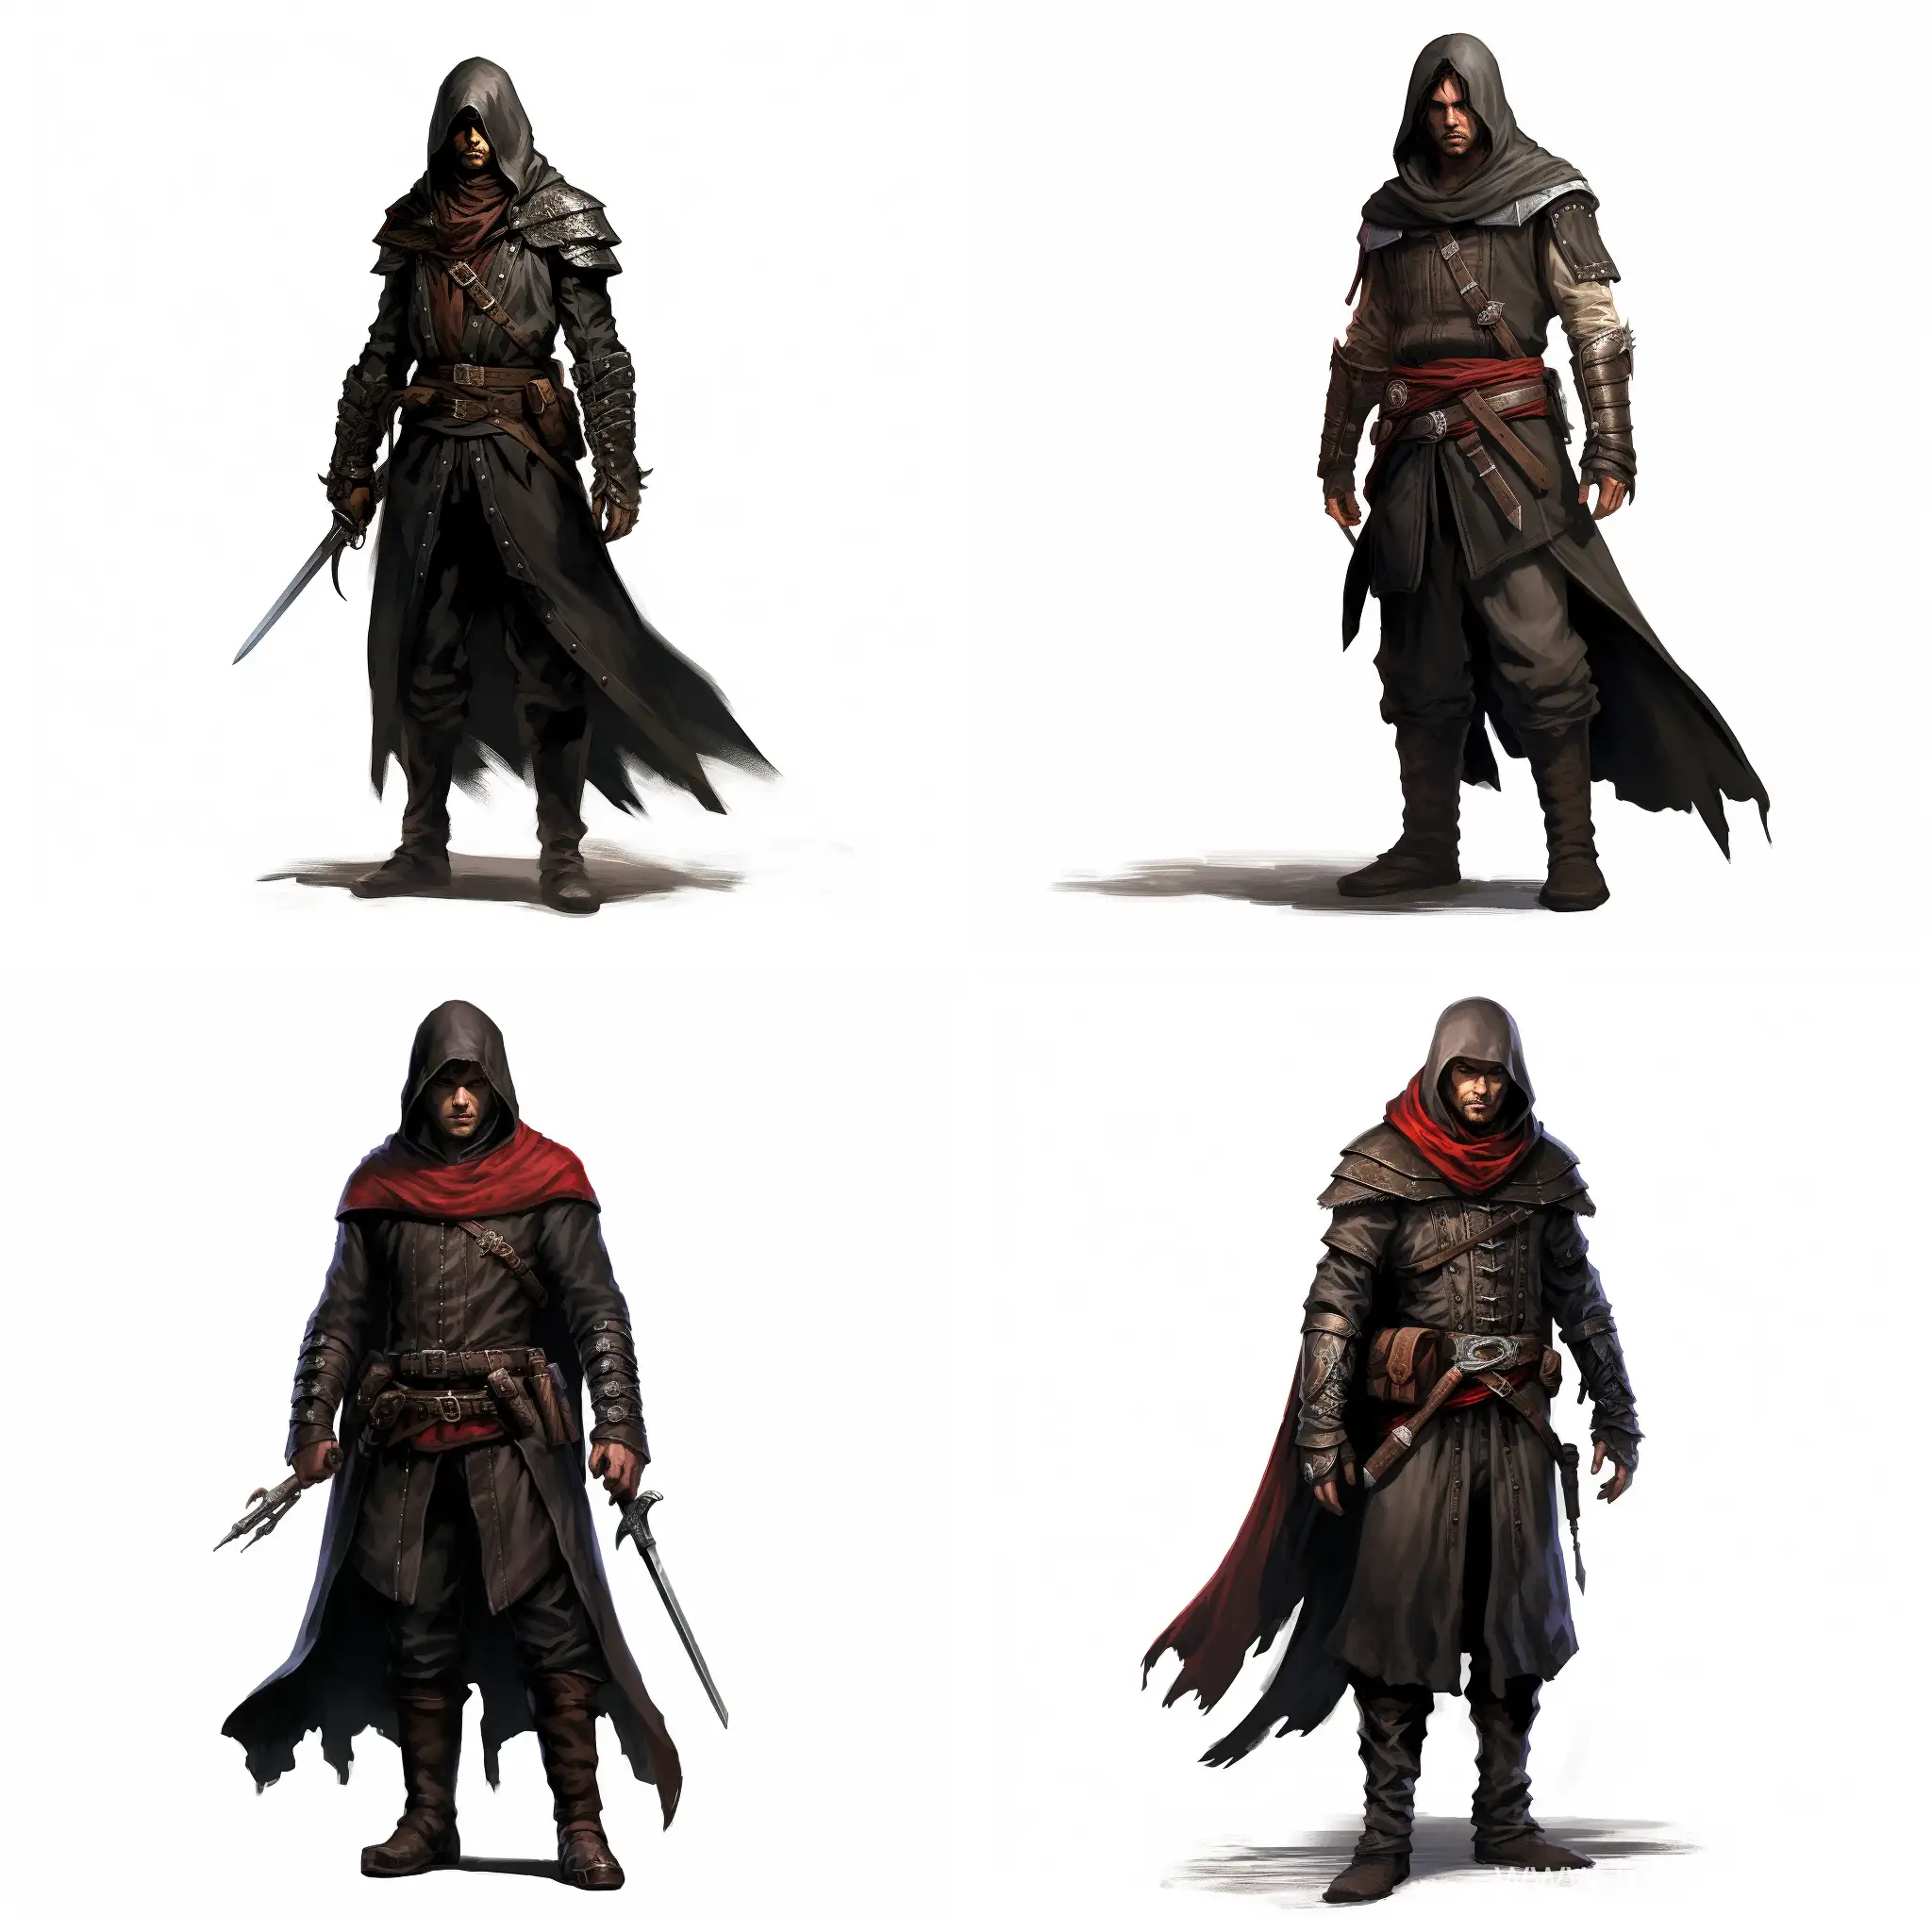 Mysterious-Male-Rogue-Assassin-DD-Character-Against-White-Background